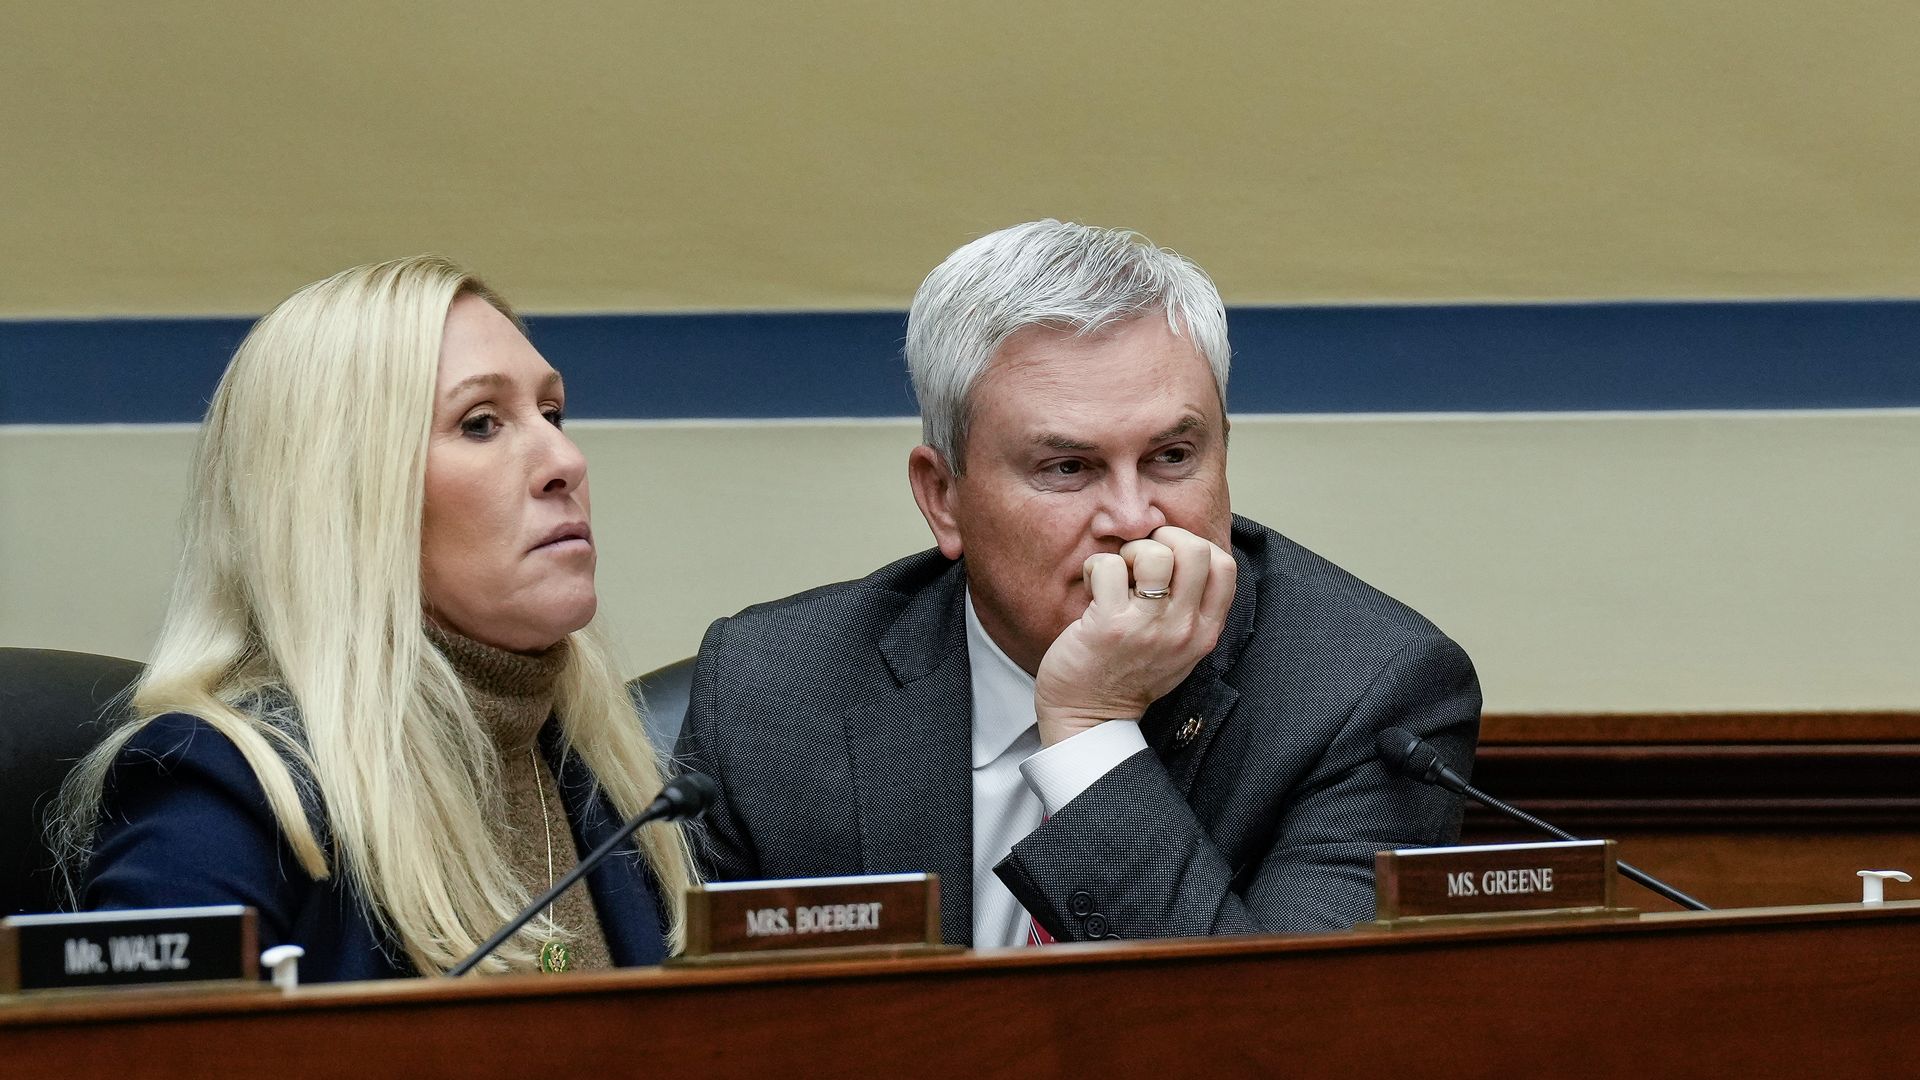 Rep. Marjorie Taylor Greene, wearing a blue blazer and brown turtleneck sweater, and Oversight Commmittee Chair James Comer, wearing a gray suit, sitting at a committee hearing.